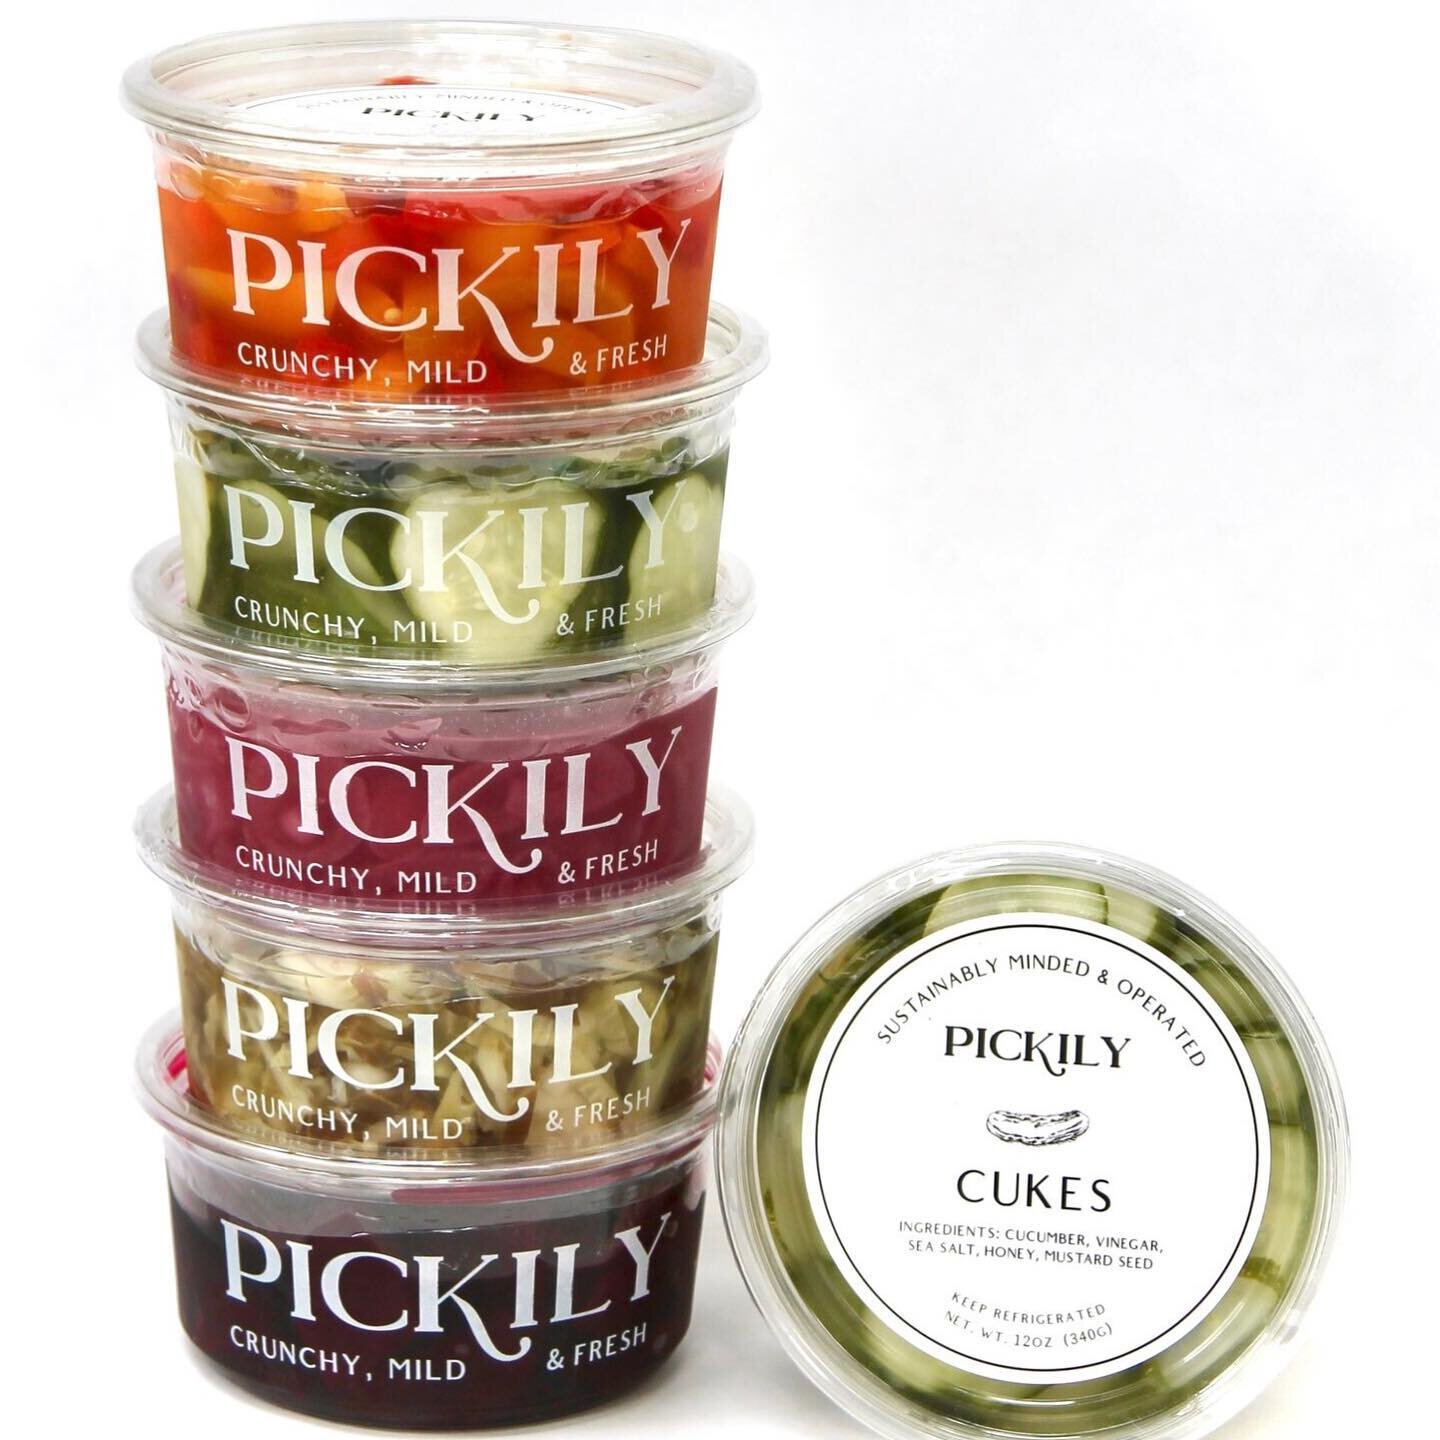 Please welcome Sam, owner and operator of Pickily Foods.

🥕 Fresh-pickled vegetables produced right here in Rhode Island. Tasty, delicious and really good for you. 

🍆 Pickily vegetables are crunchy, mild and fresh. 

🥕The brine is more sour than 